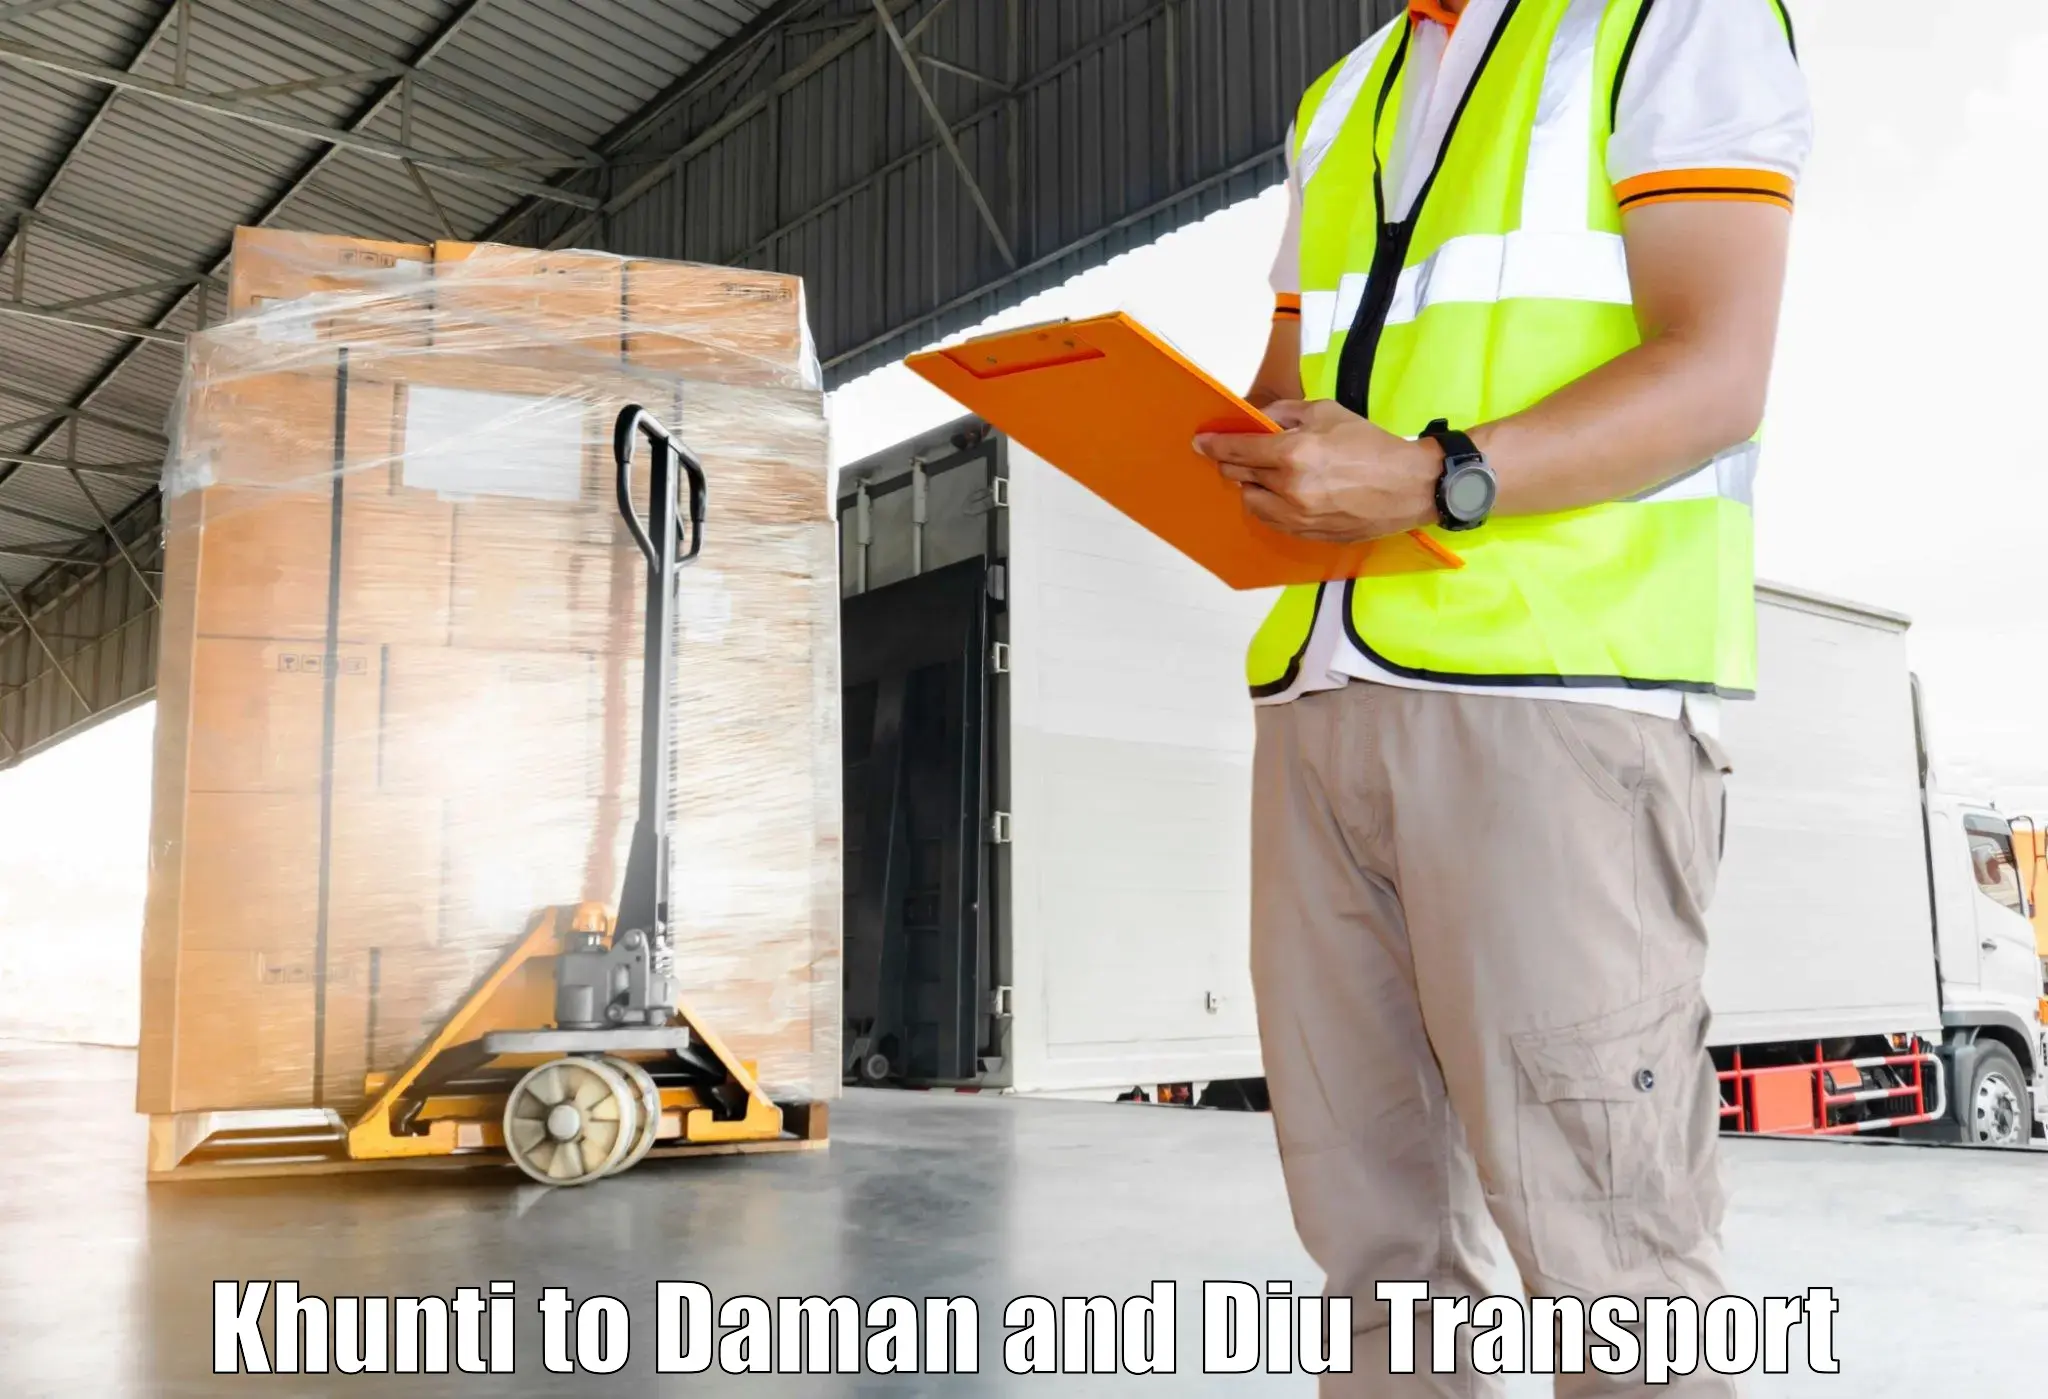 Truck transport companies in India Khunti to Daman and Diu